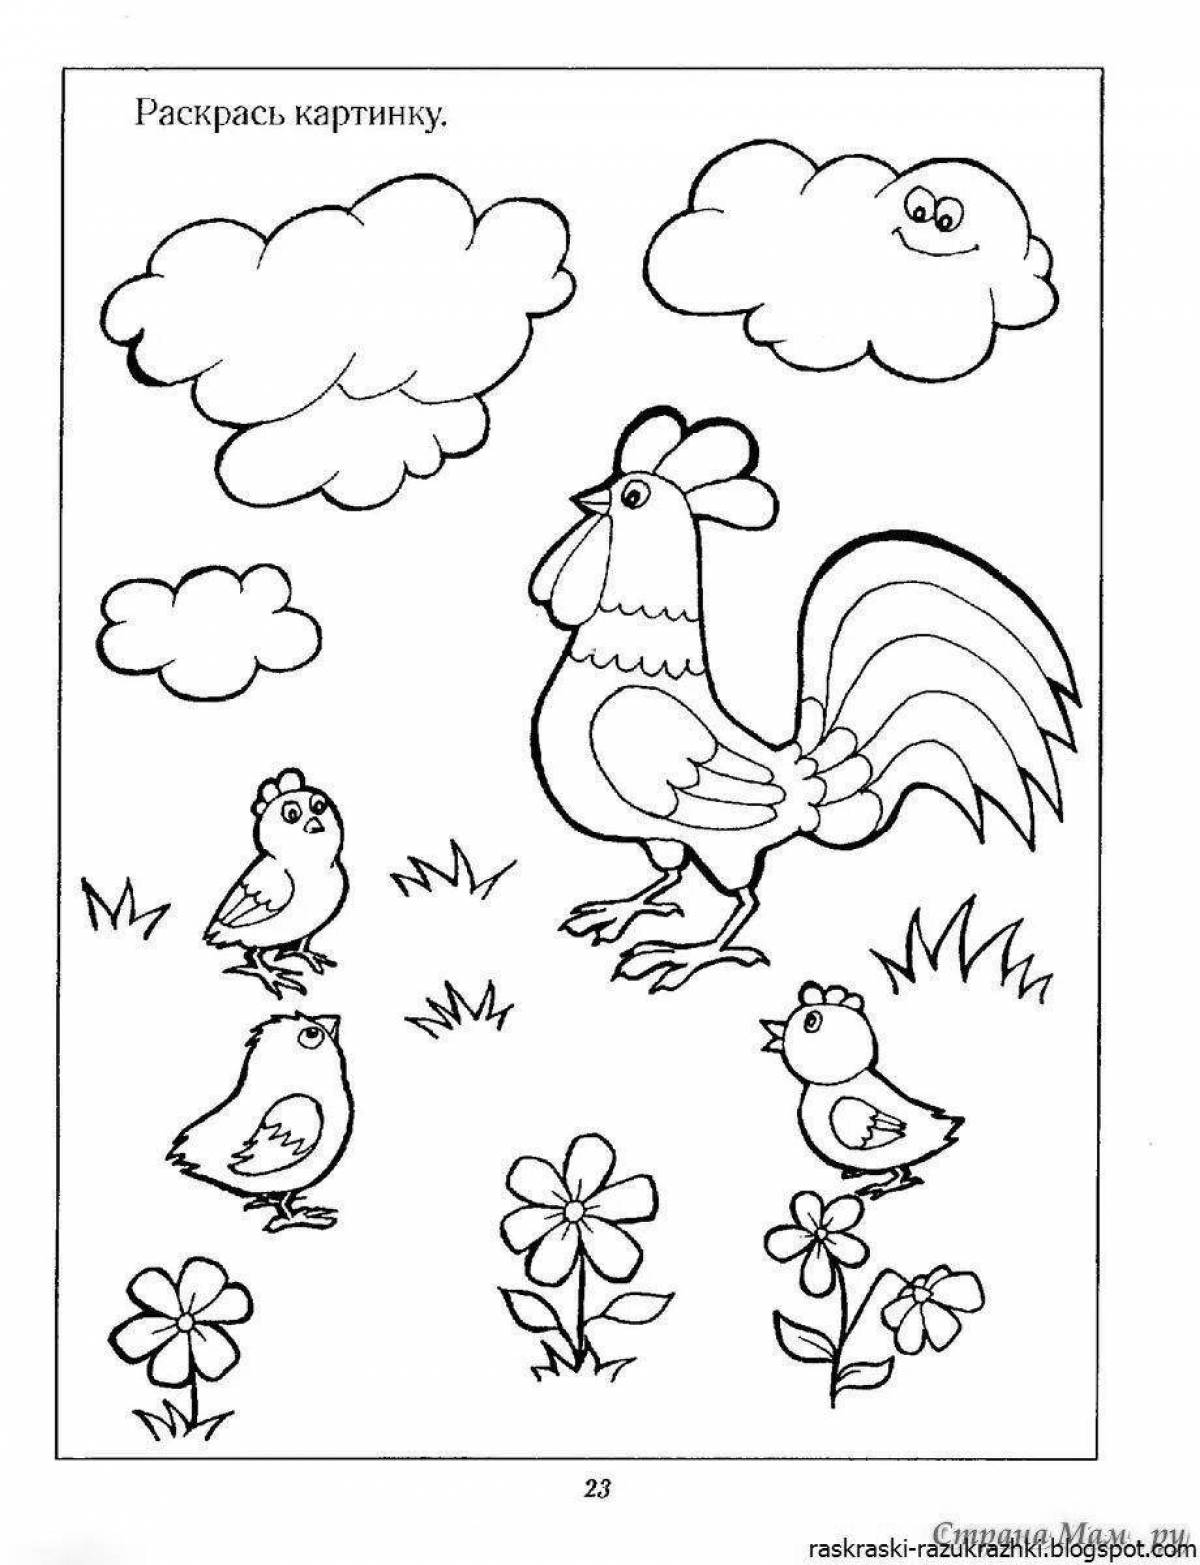 Innovative coloring games for 4-5 year olds